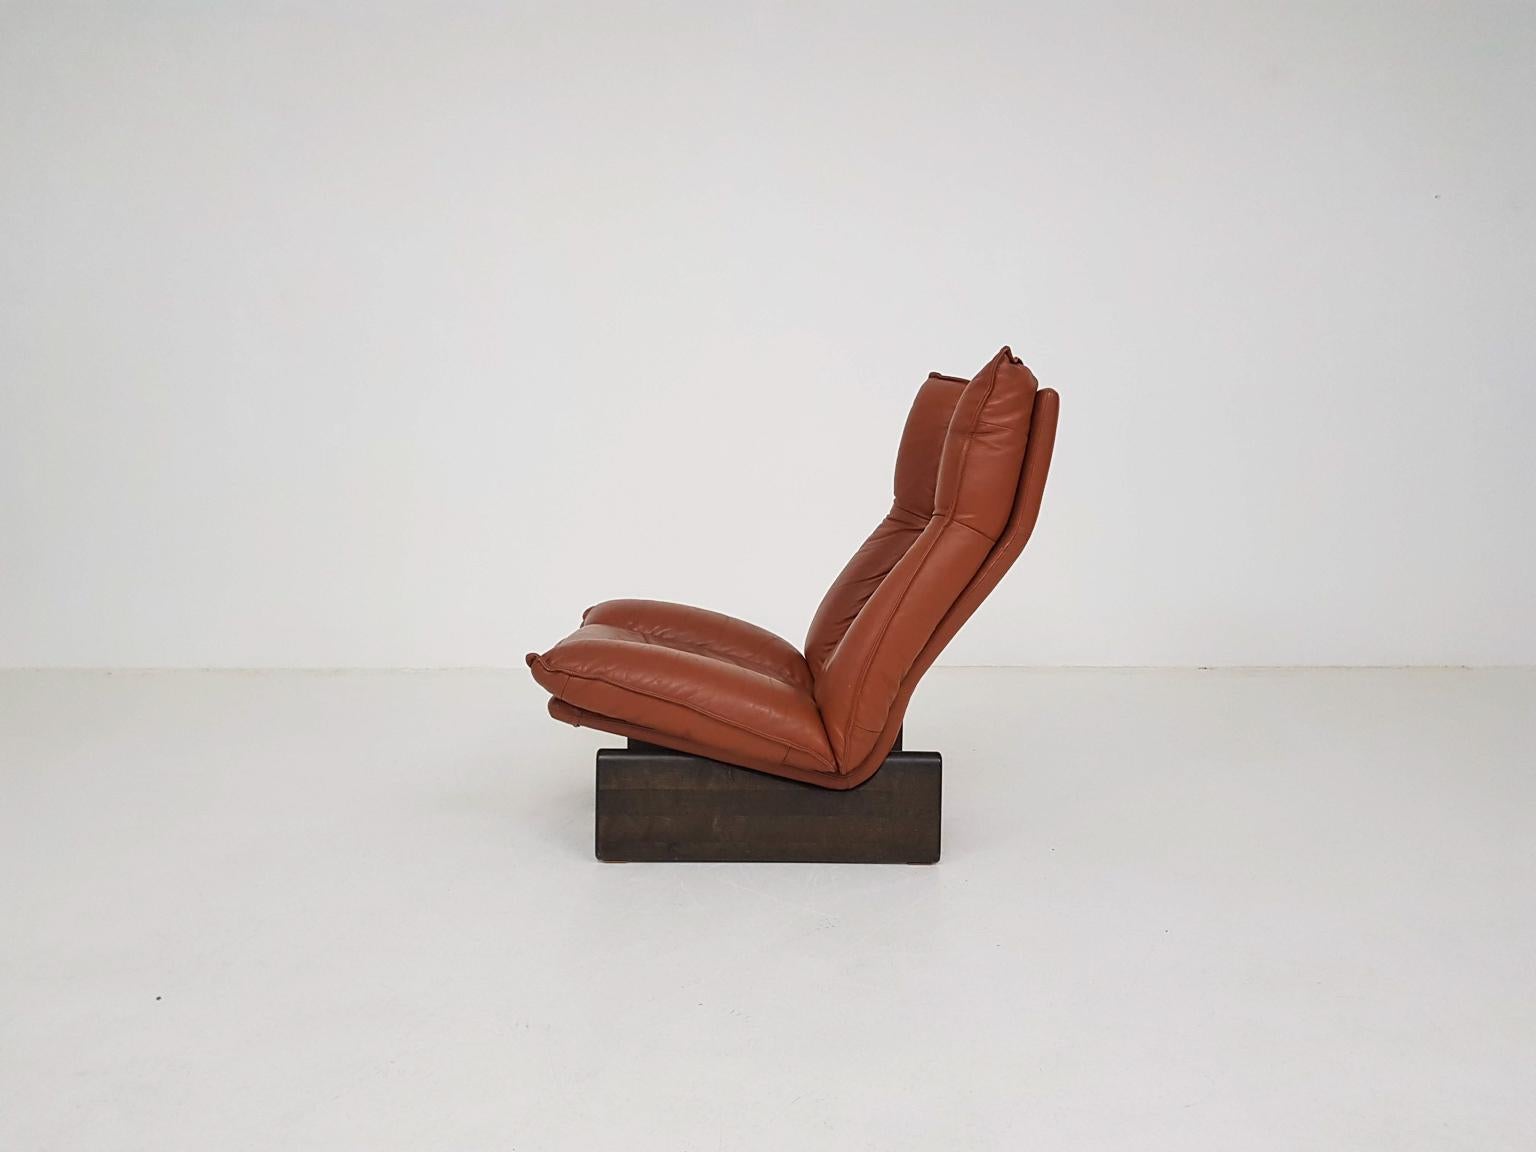 Mid-Century Modern Leather and Wood Lounge Chair by Leolux, Dutch Modern Design, 1970s